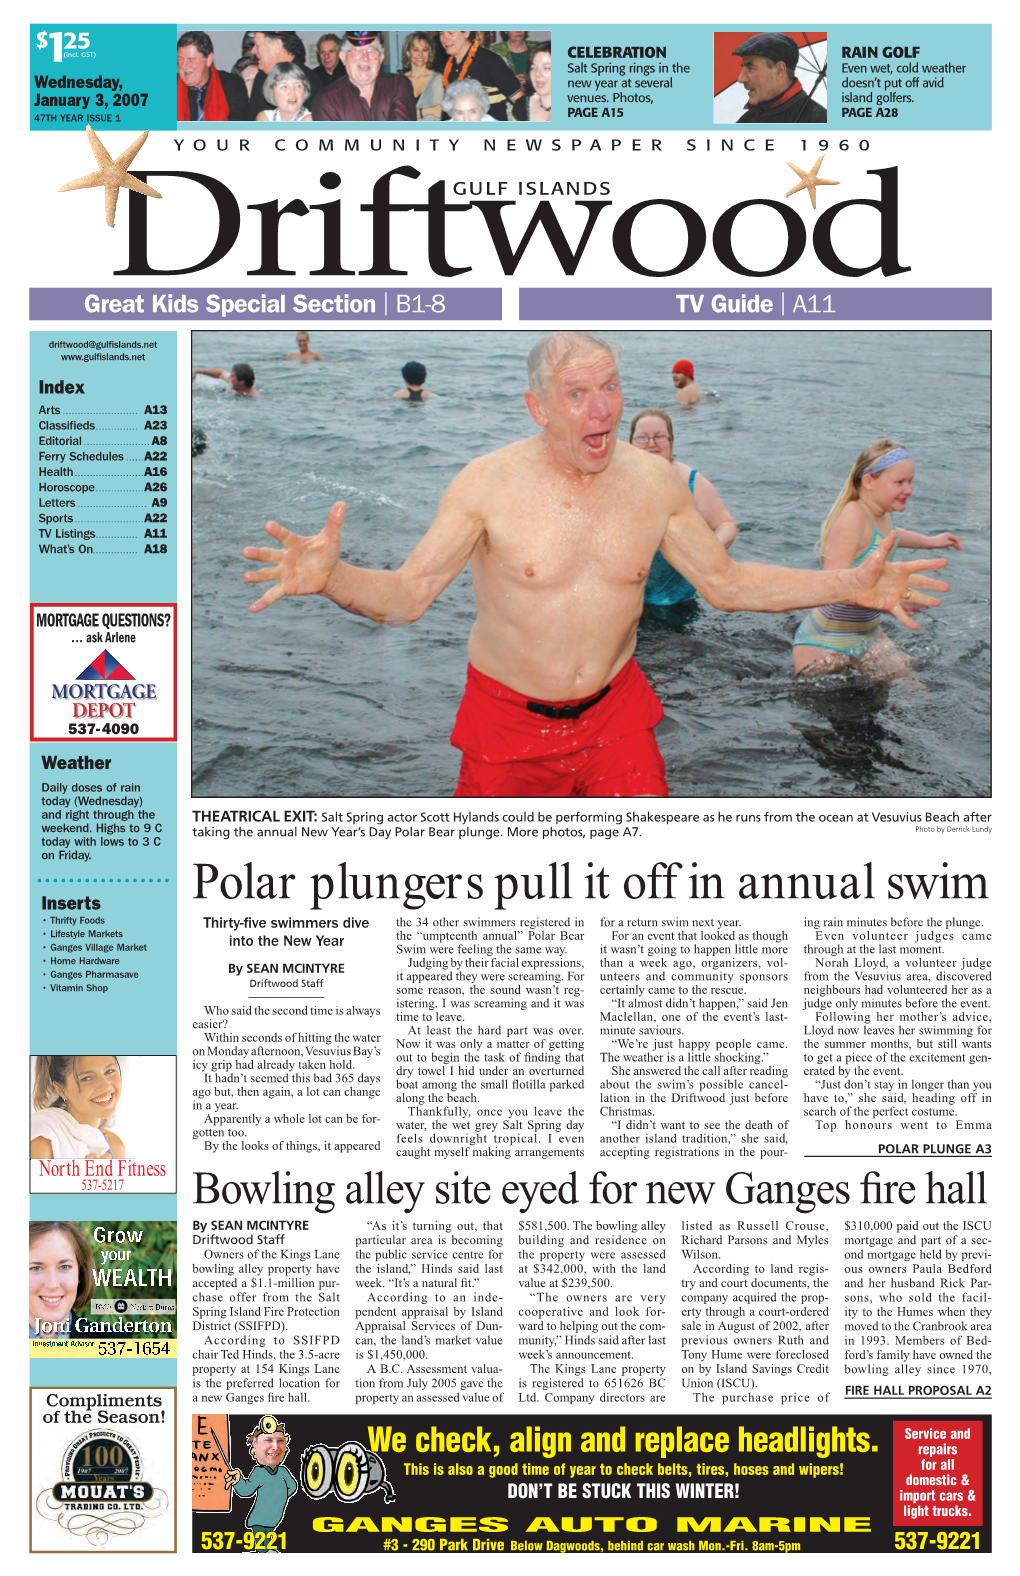 Polar Plungers Pull It Off in Annual Swim • Thrifty Foods Thirty-ﬁ Ve Swimmers Dive the 34 Other Swimmers Registered in for a Return Swim Next Year